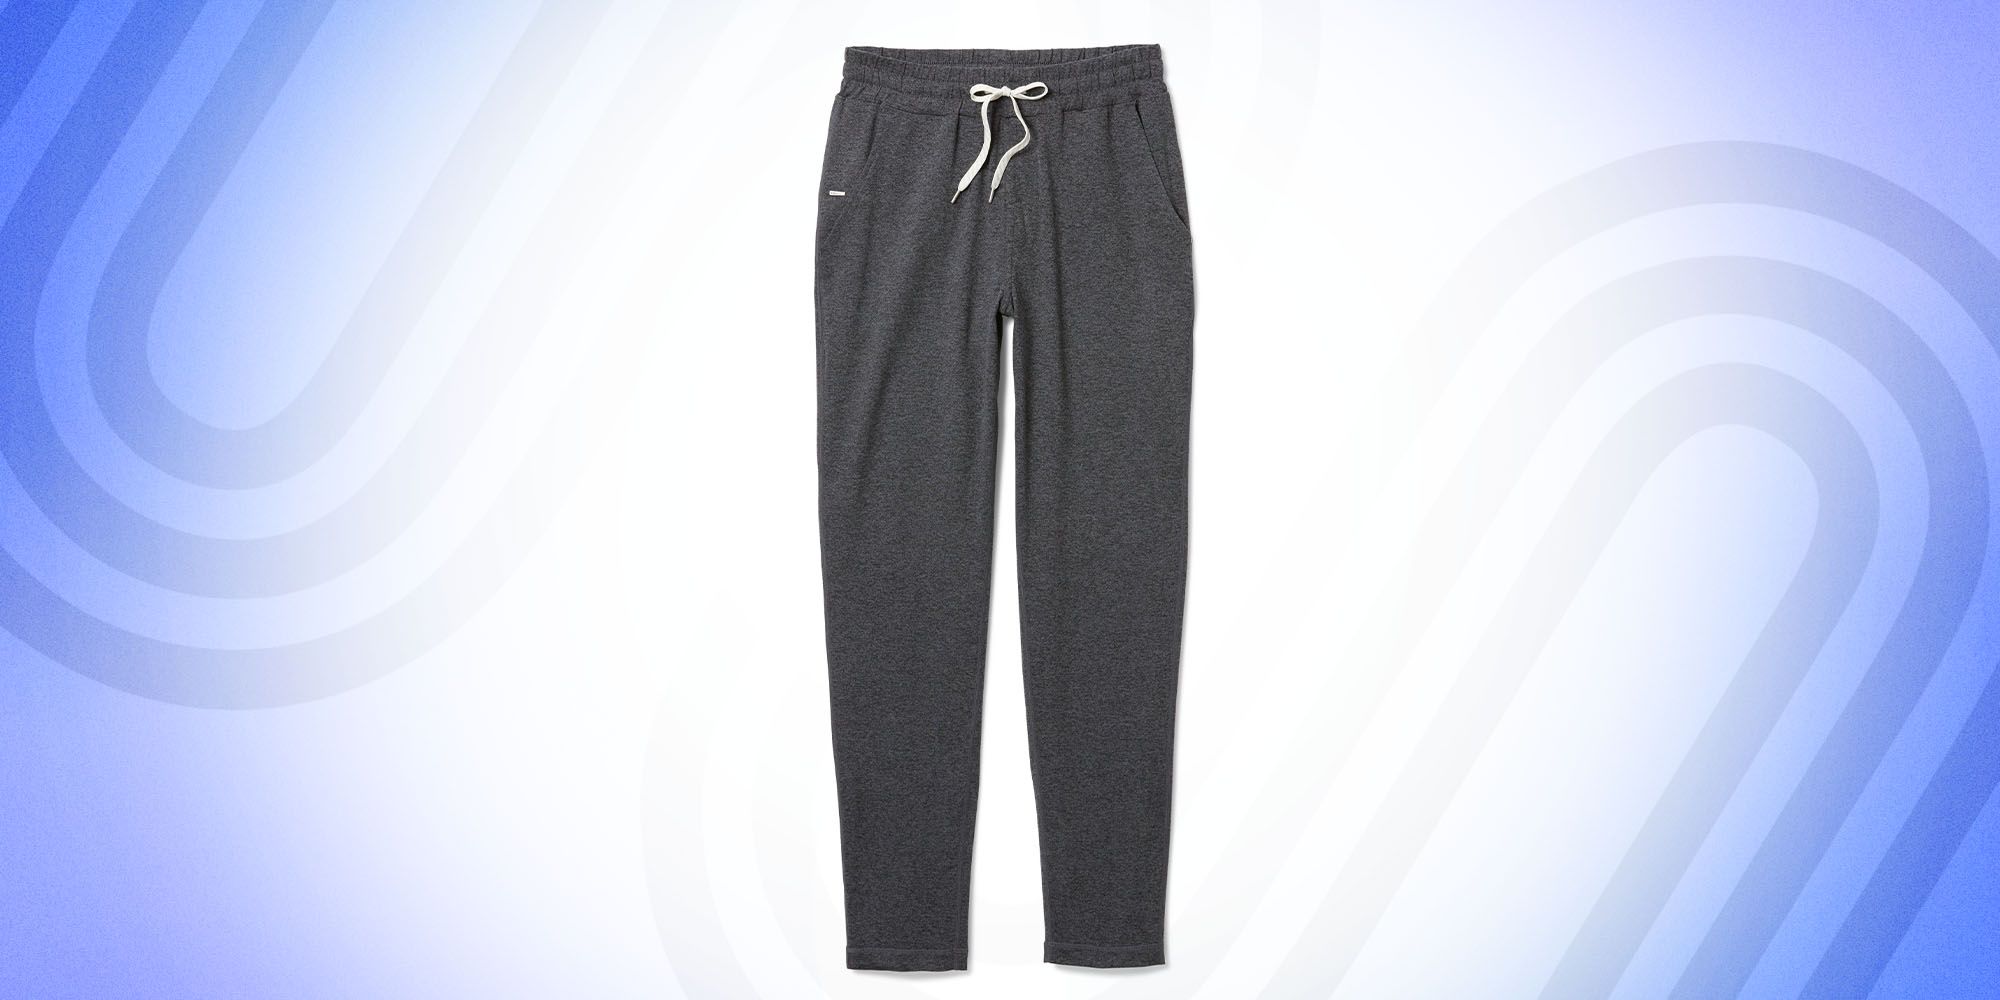 Post-black Friday Deal: Baleaf Joggers Are $24